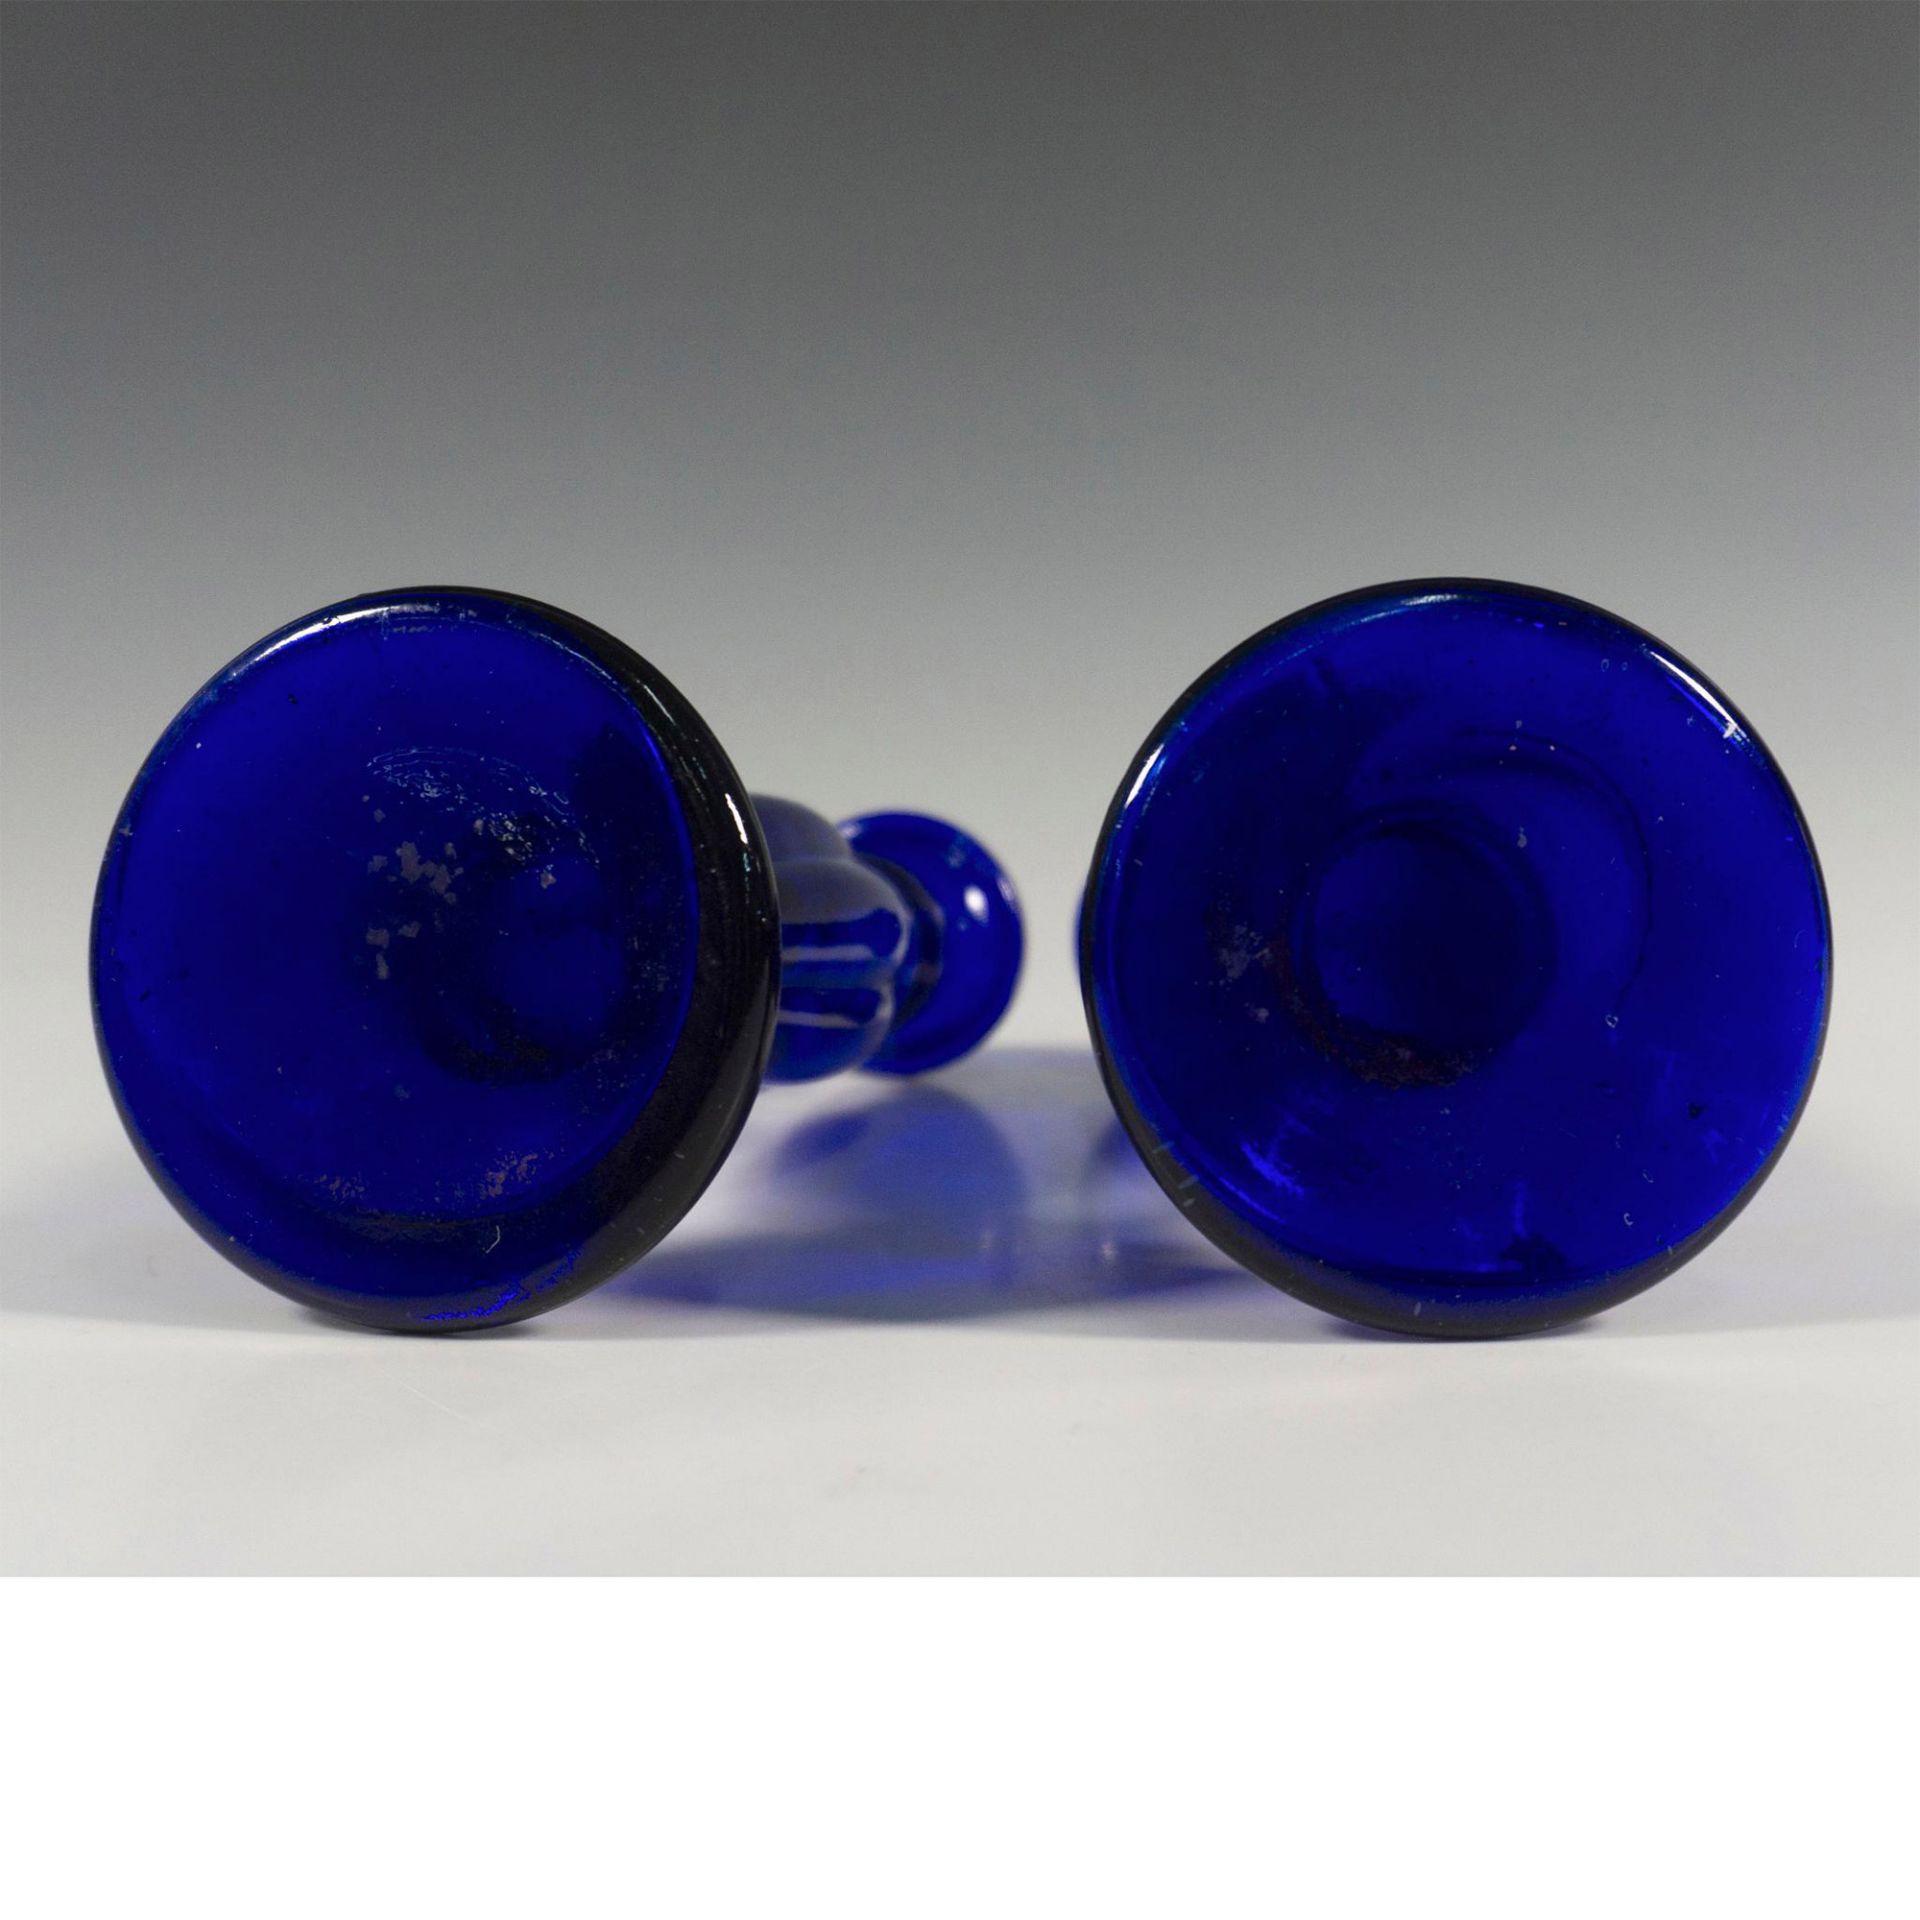 Pair of Vintage Art Glass Blue Candle Holders - Image 5 of 5